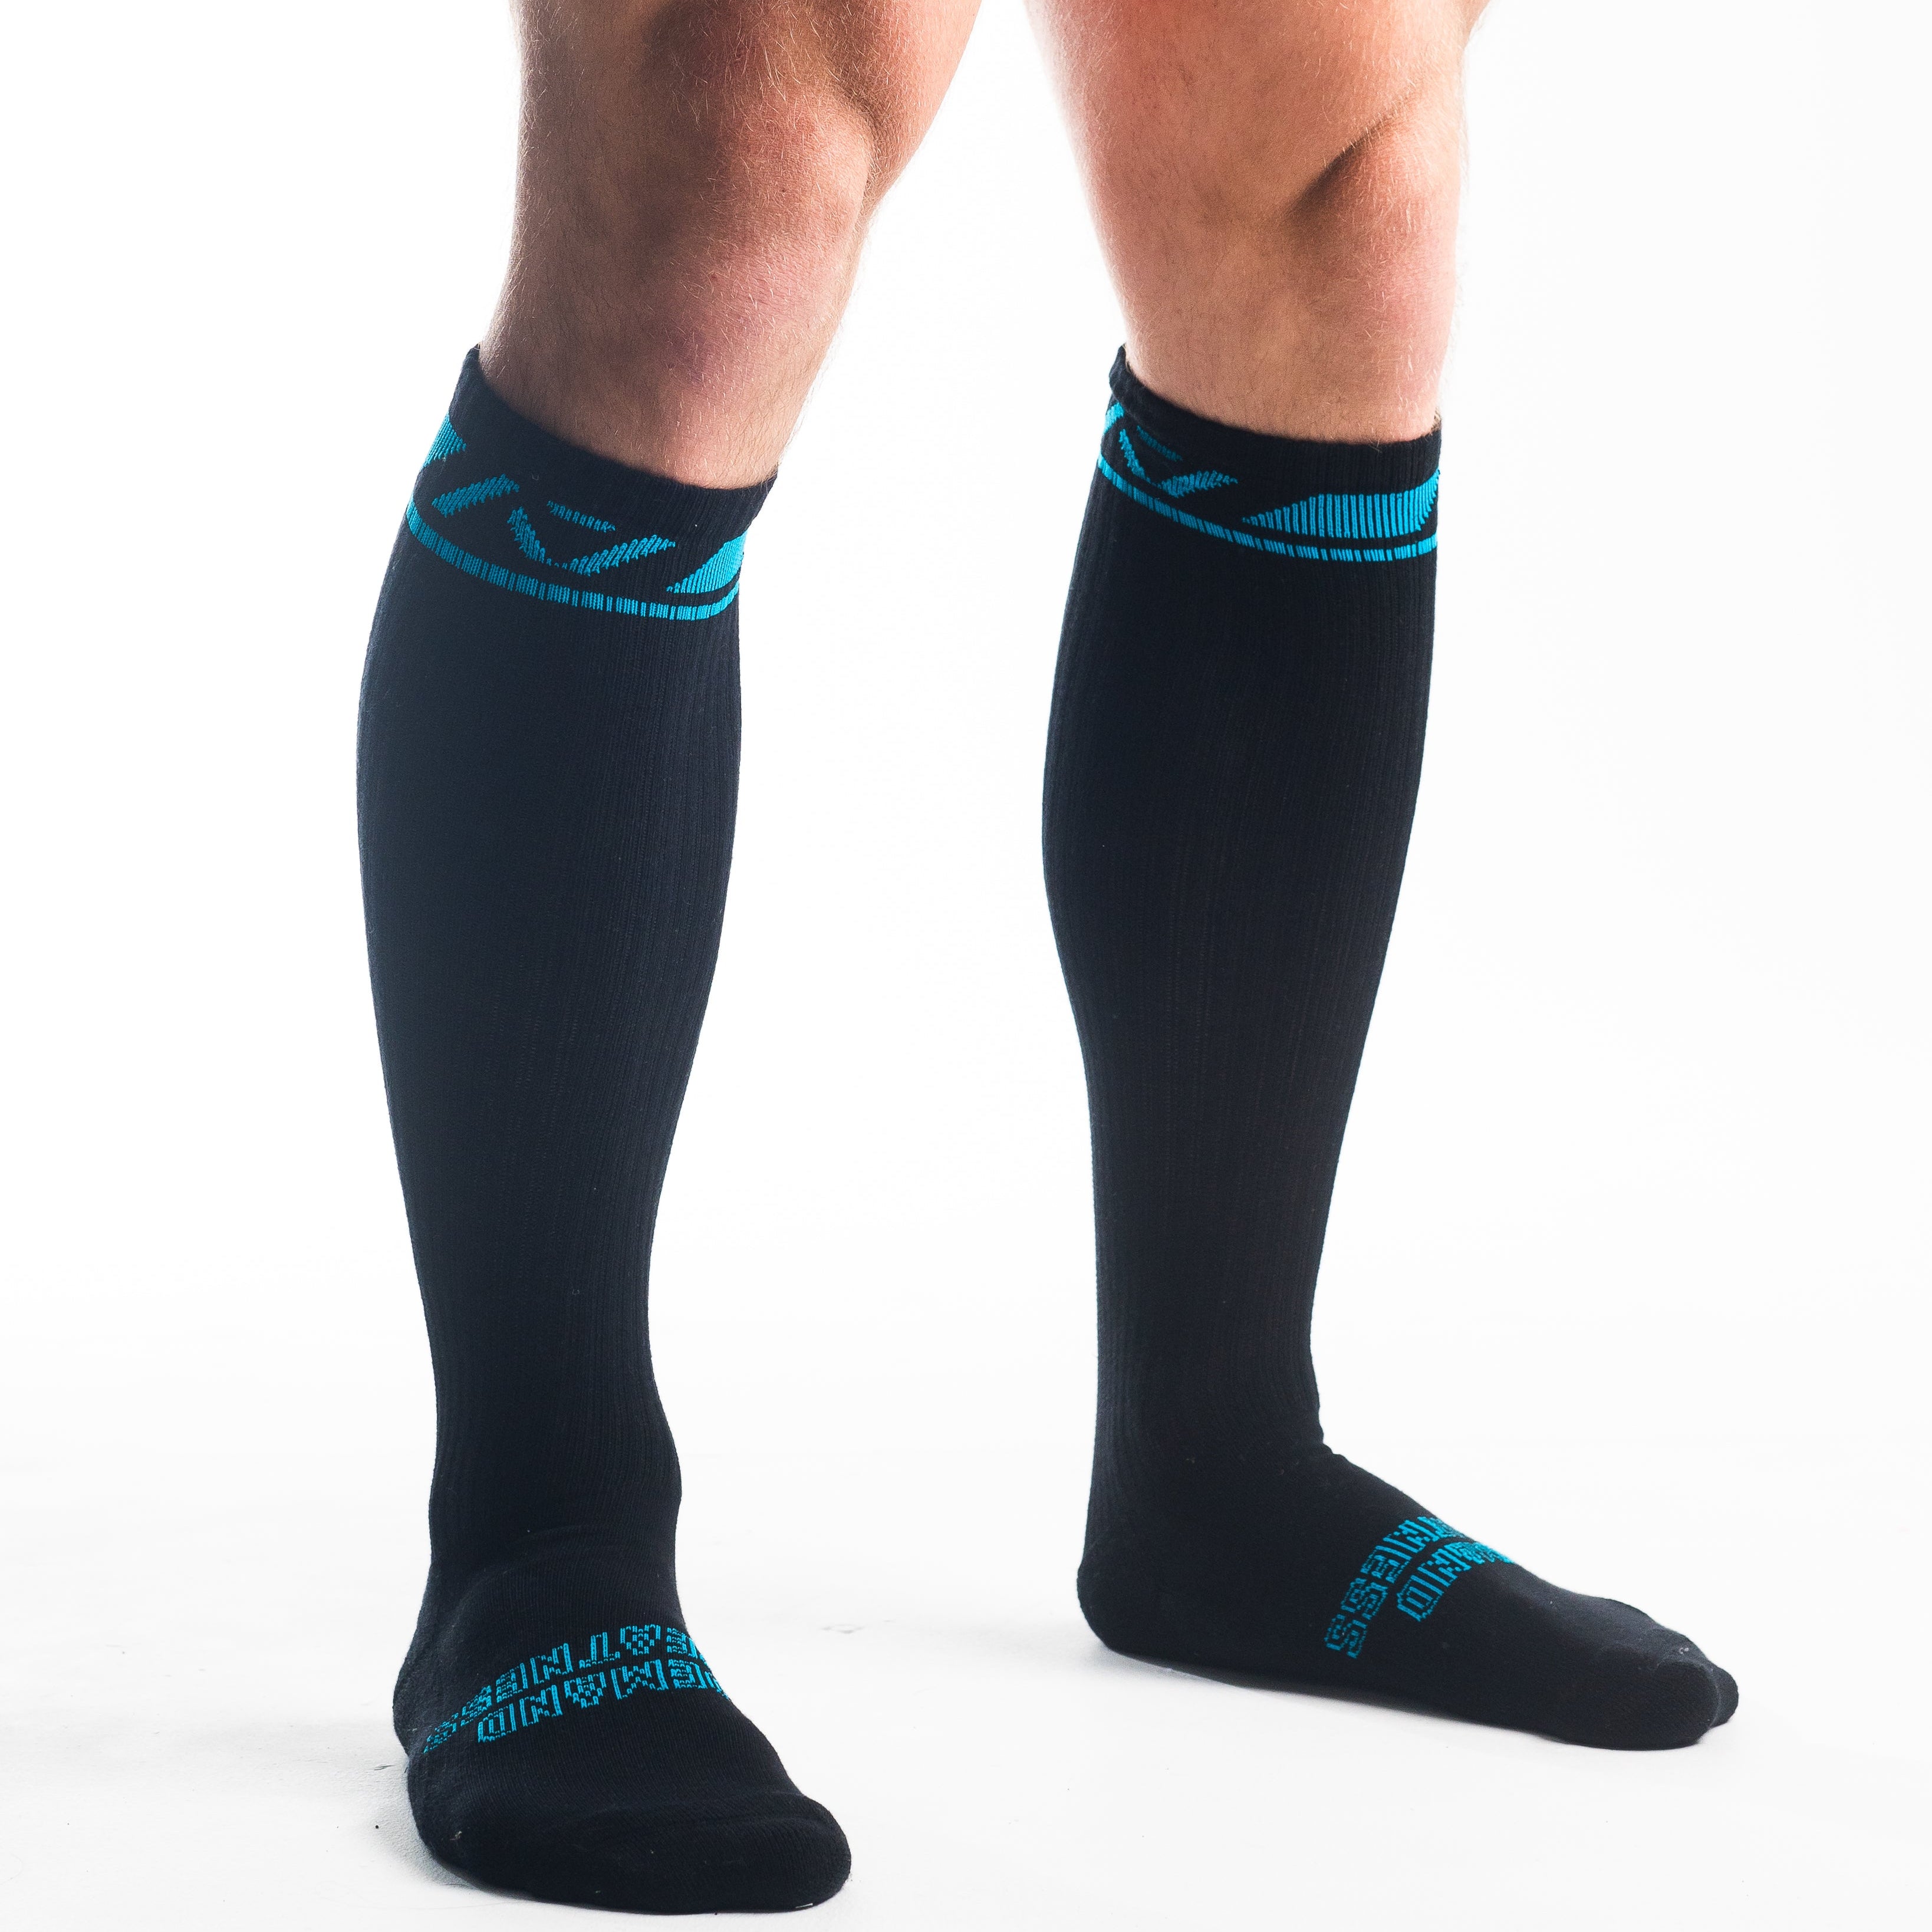 A7 Azul Deadlift socks are designed specifically for pulls and keep your shins protected from scrapes. A7 deadlift socks are a perfect pair to wear in training or powerlifting competition. The IPF Approved Kit includes Powerlifting Singlet, A7 Meet Shirt, A7 Zebra Wrist Wraps, A7 Deadlift Socks, Hourglass Knee Sleeves (Stiff Knee Sleeves and Rigor Mortis Knee Sleeves). All A7 Powerlifting Equipment shipping to UK, Norway, Switzerland and Iceland.